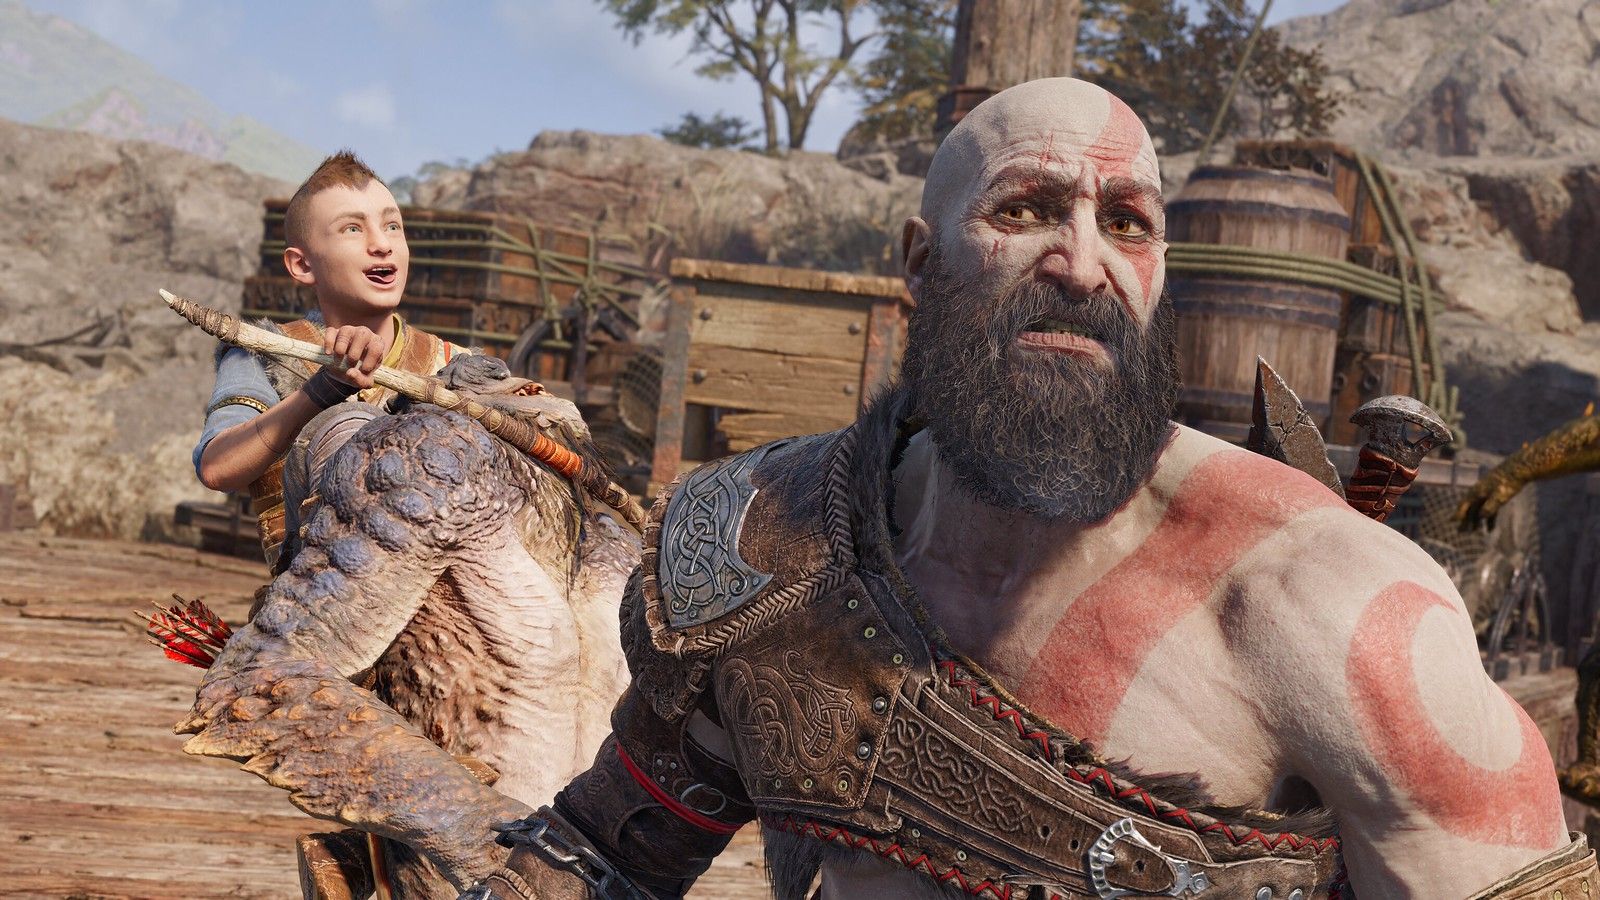 kratos cringes as atreus pulls a silly face